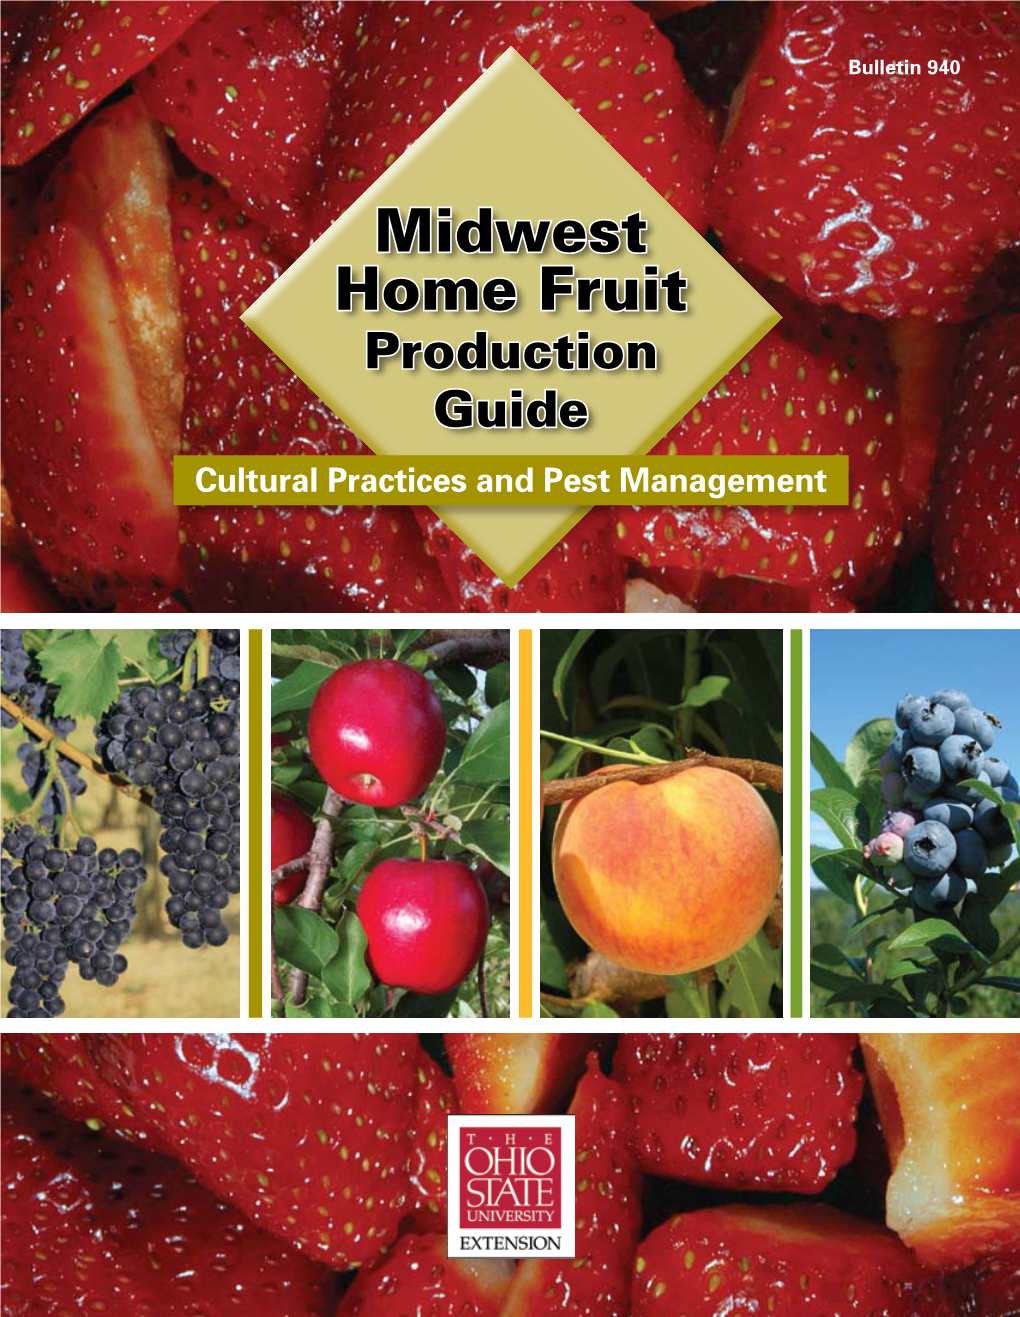 Midwest Home Fruit Production Guide